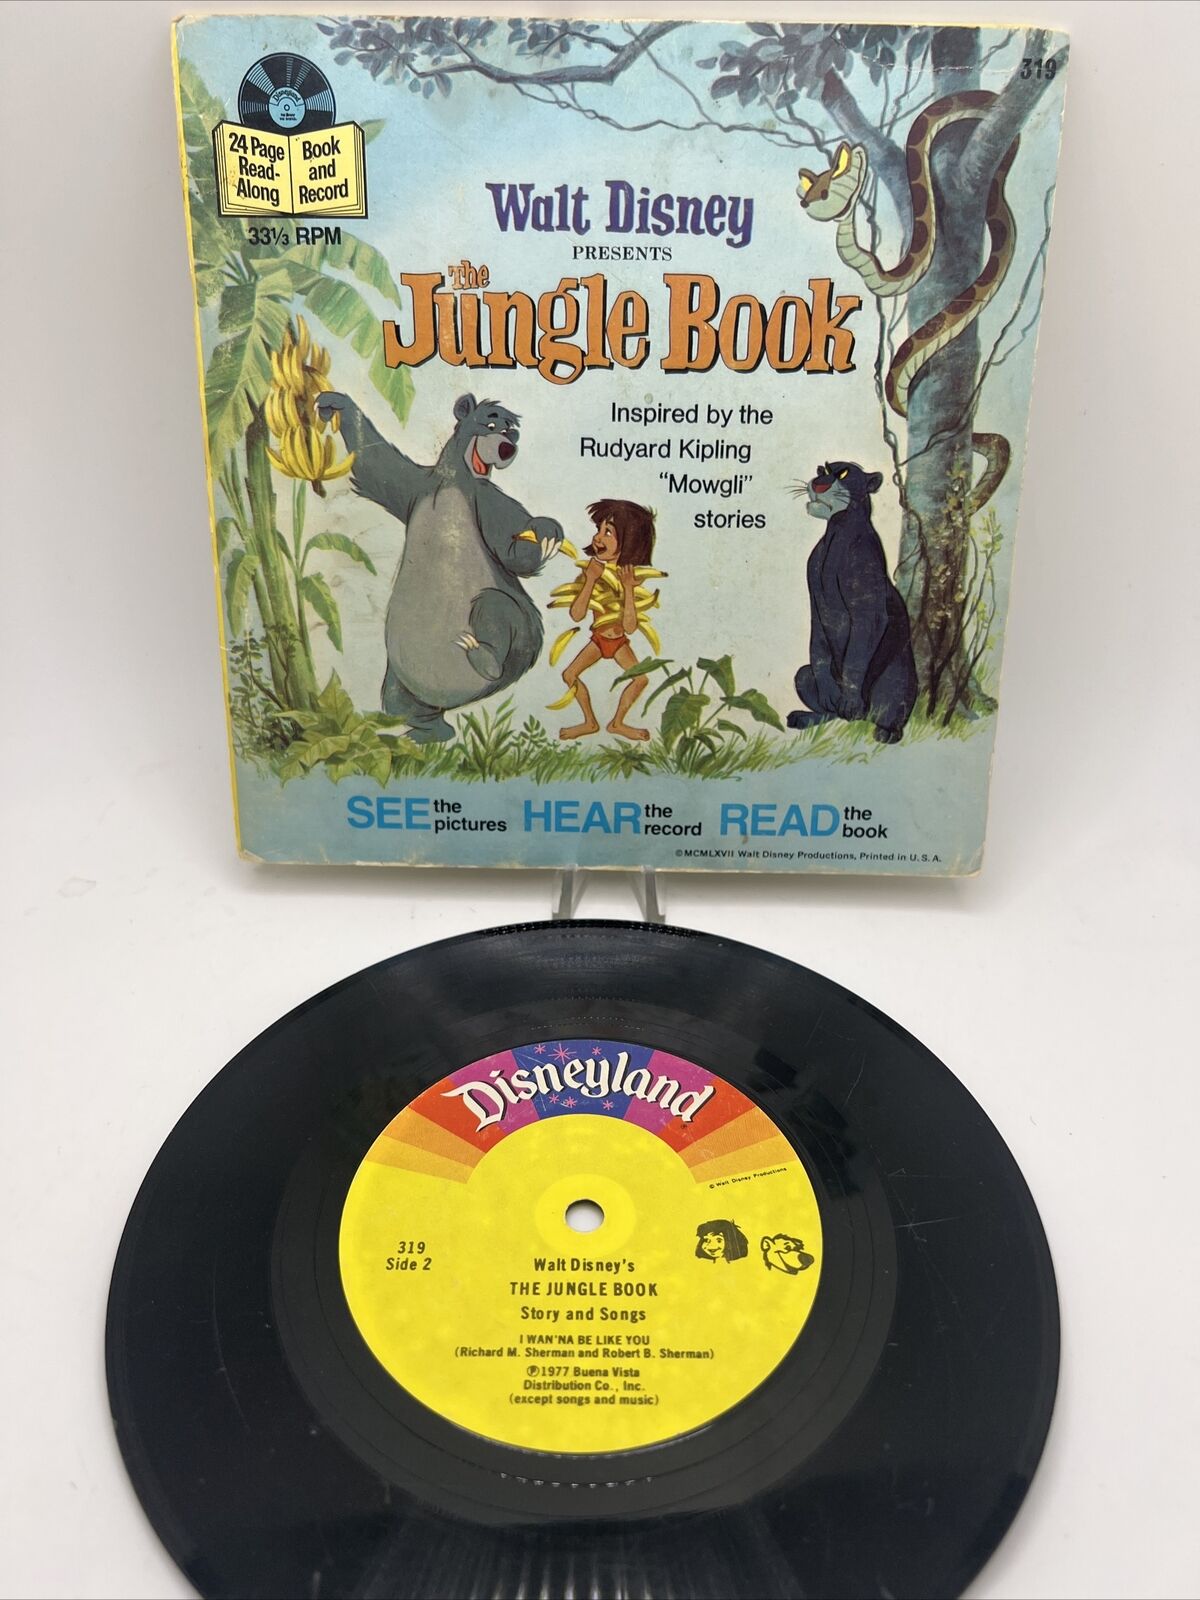 Vintage 1977 Walt Disney The Jungle Book And Record 33 1/3 See Hear Read Book